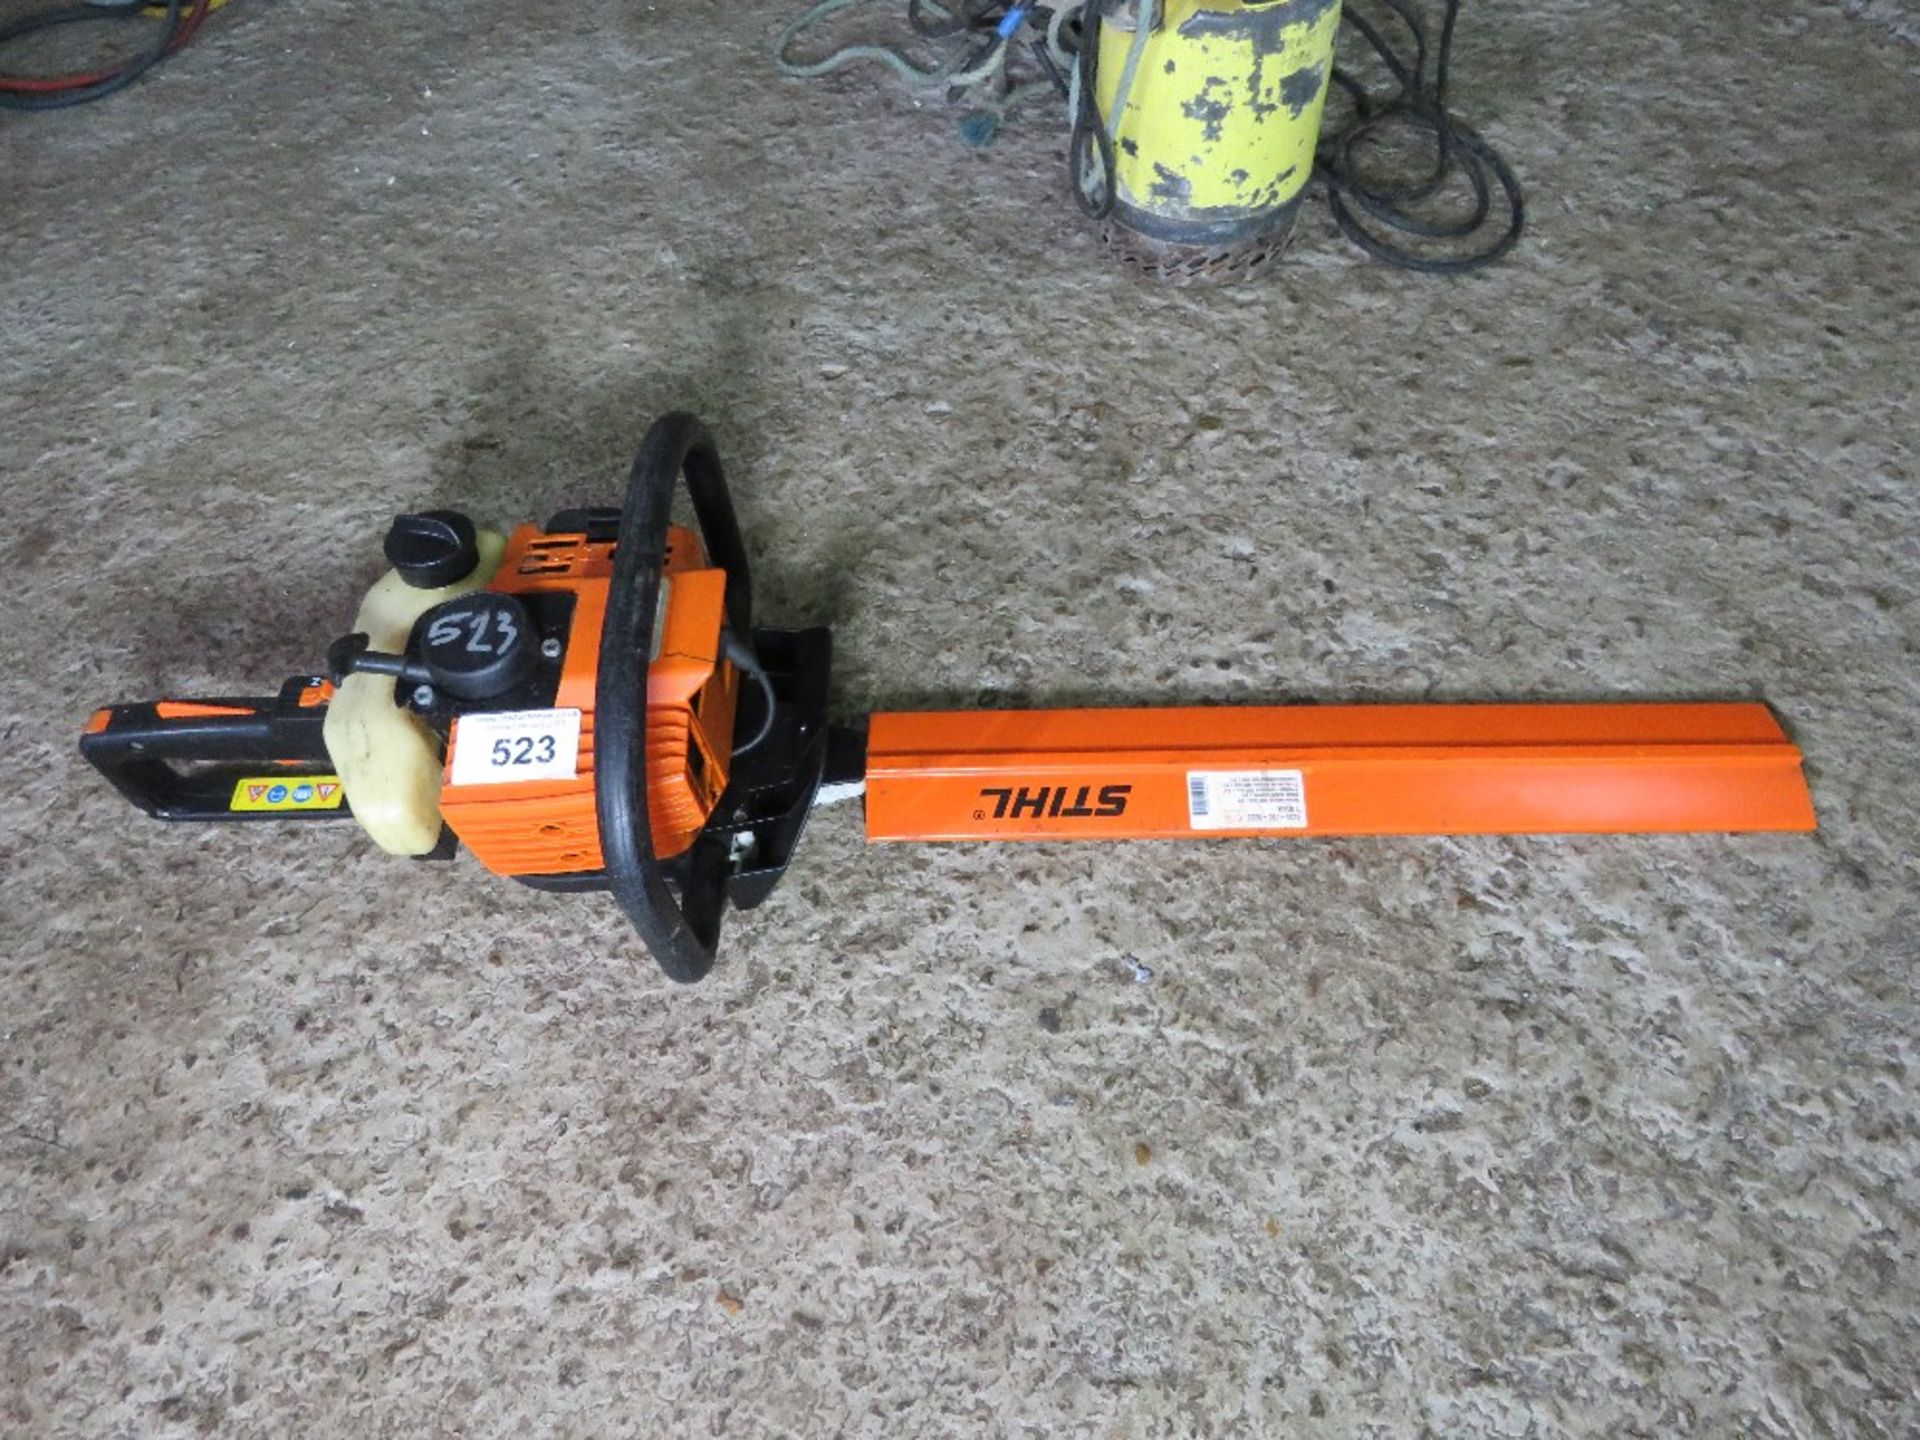 STIHL HS75 PETROL ENGINED HEDGE CUTTER. THIS LOT IS SOLD UNDER THE AUCTIONEERS MARGIN SCHEME, THE